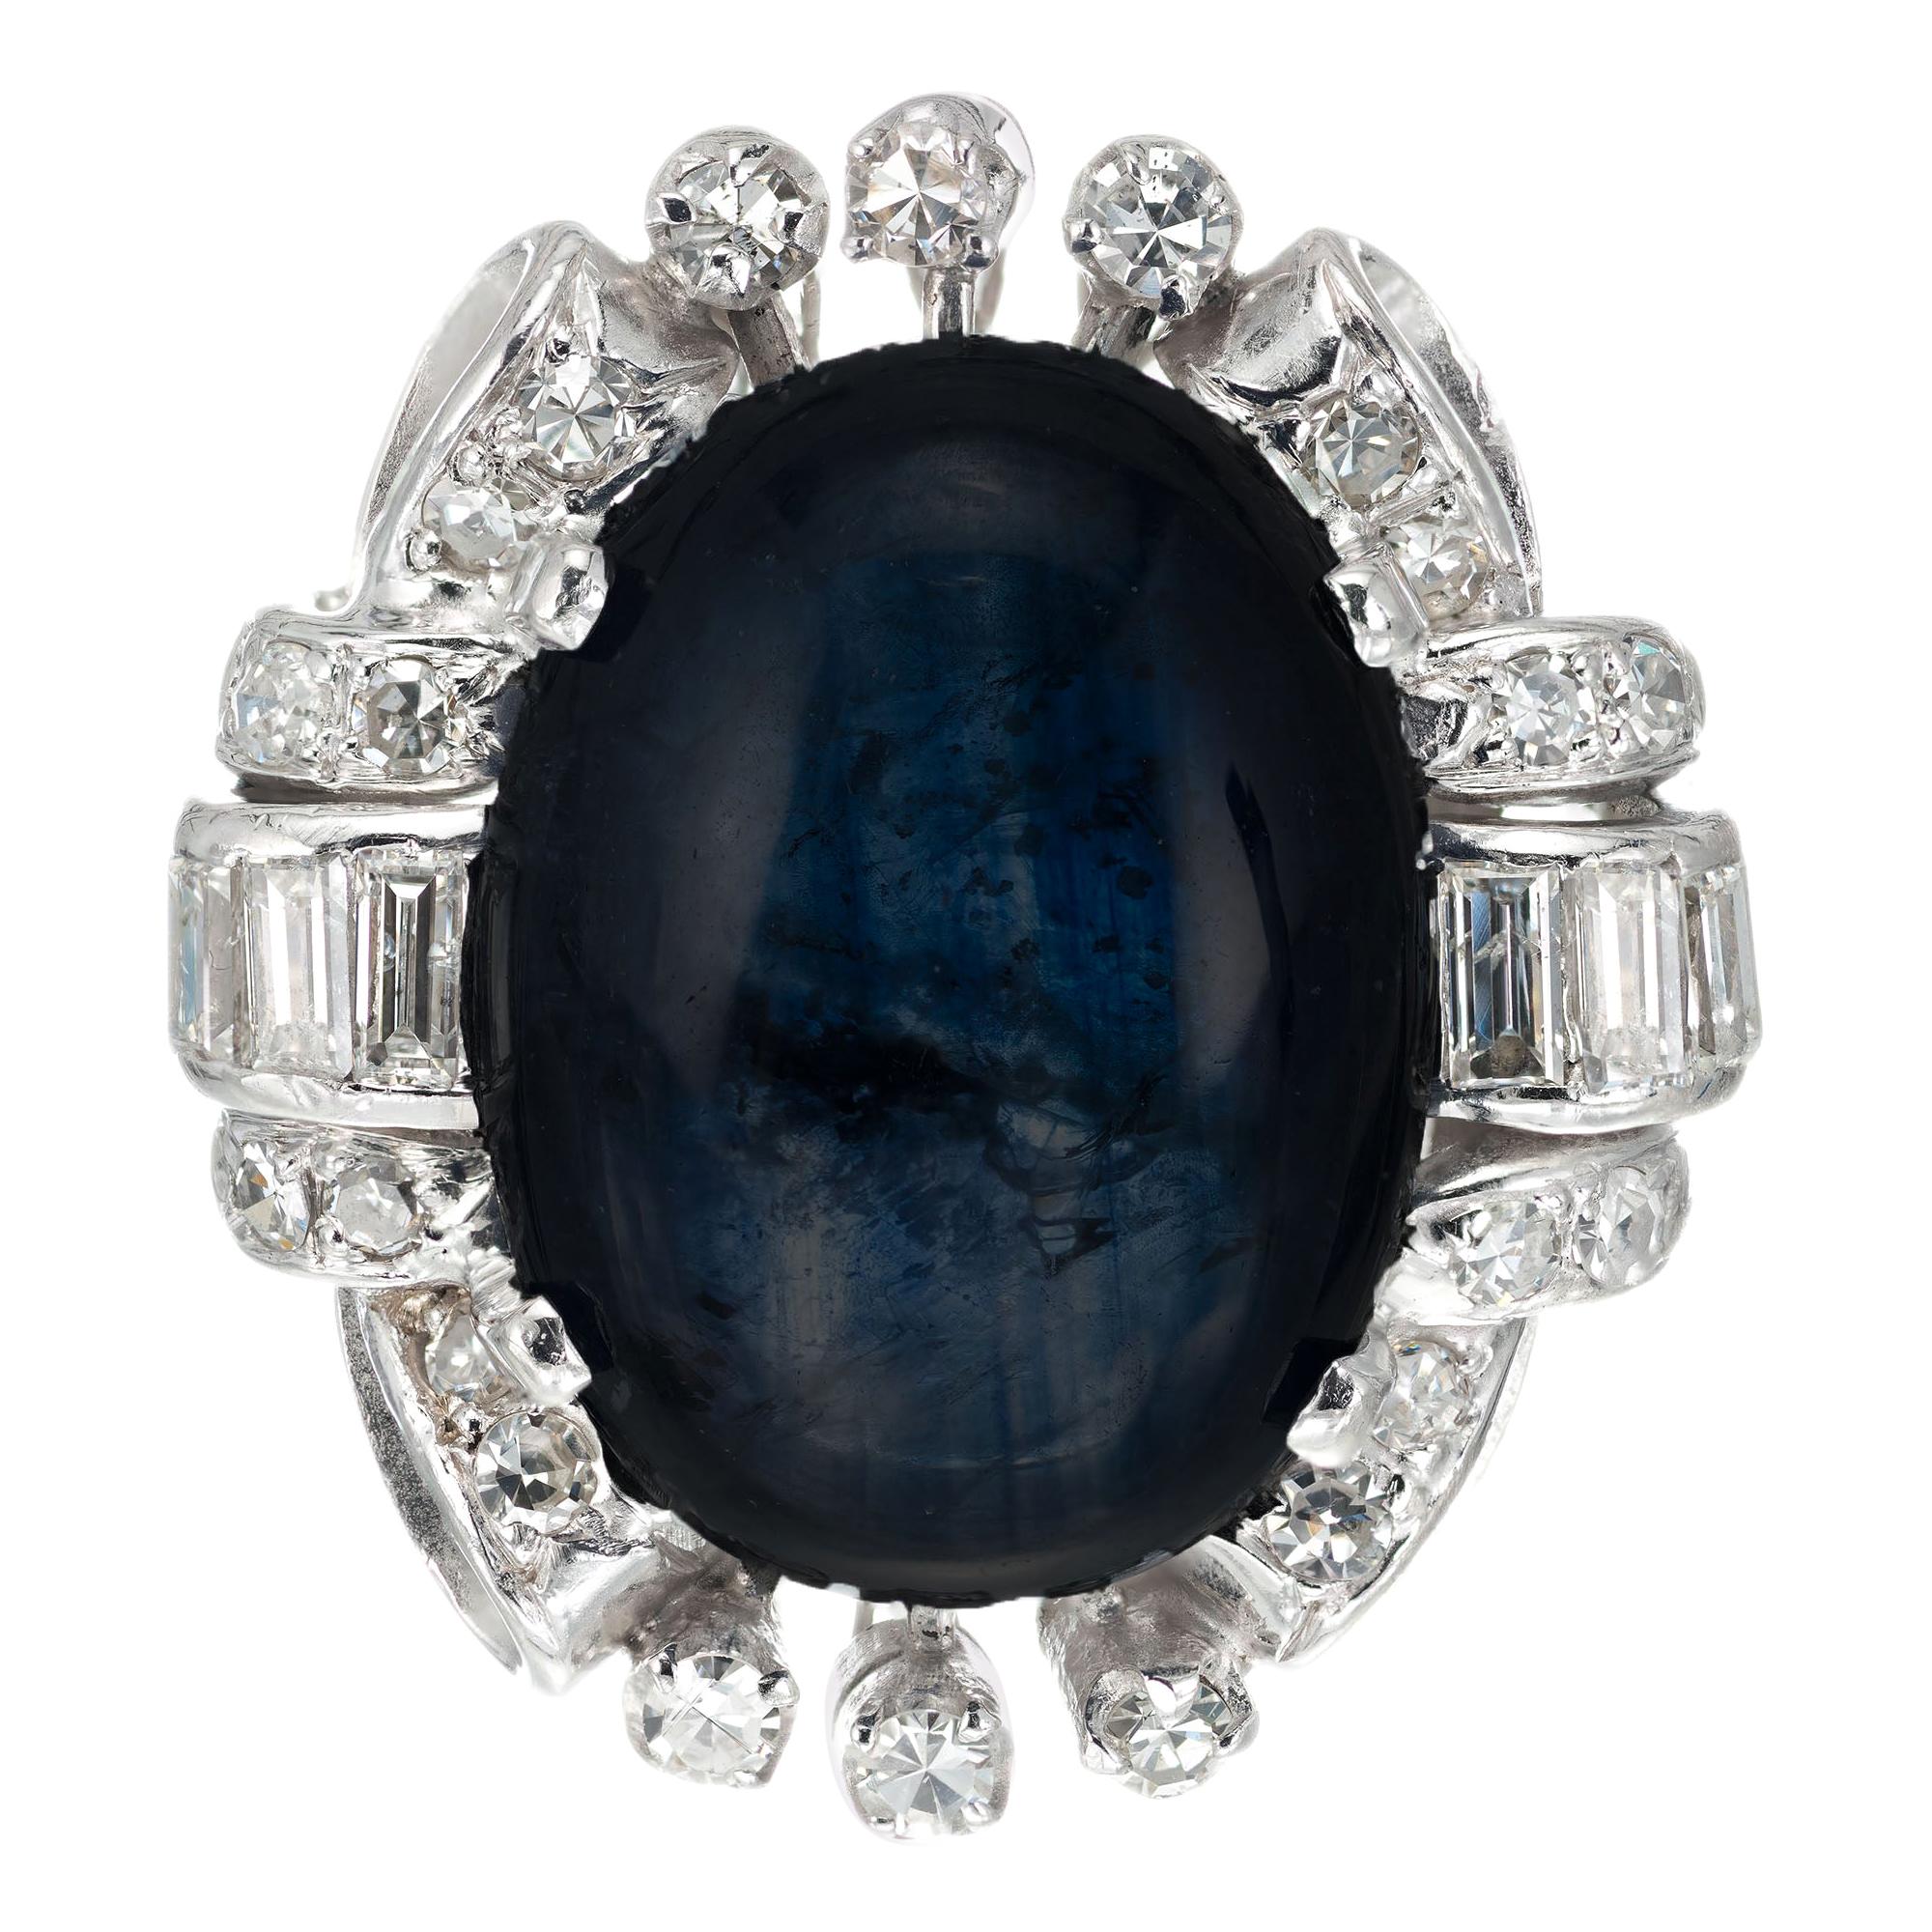 10.33 Carat Oval Cabochon Sapphire Diamond Gold Art Deco Cocktail Ring For Sale